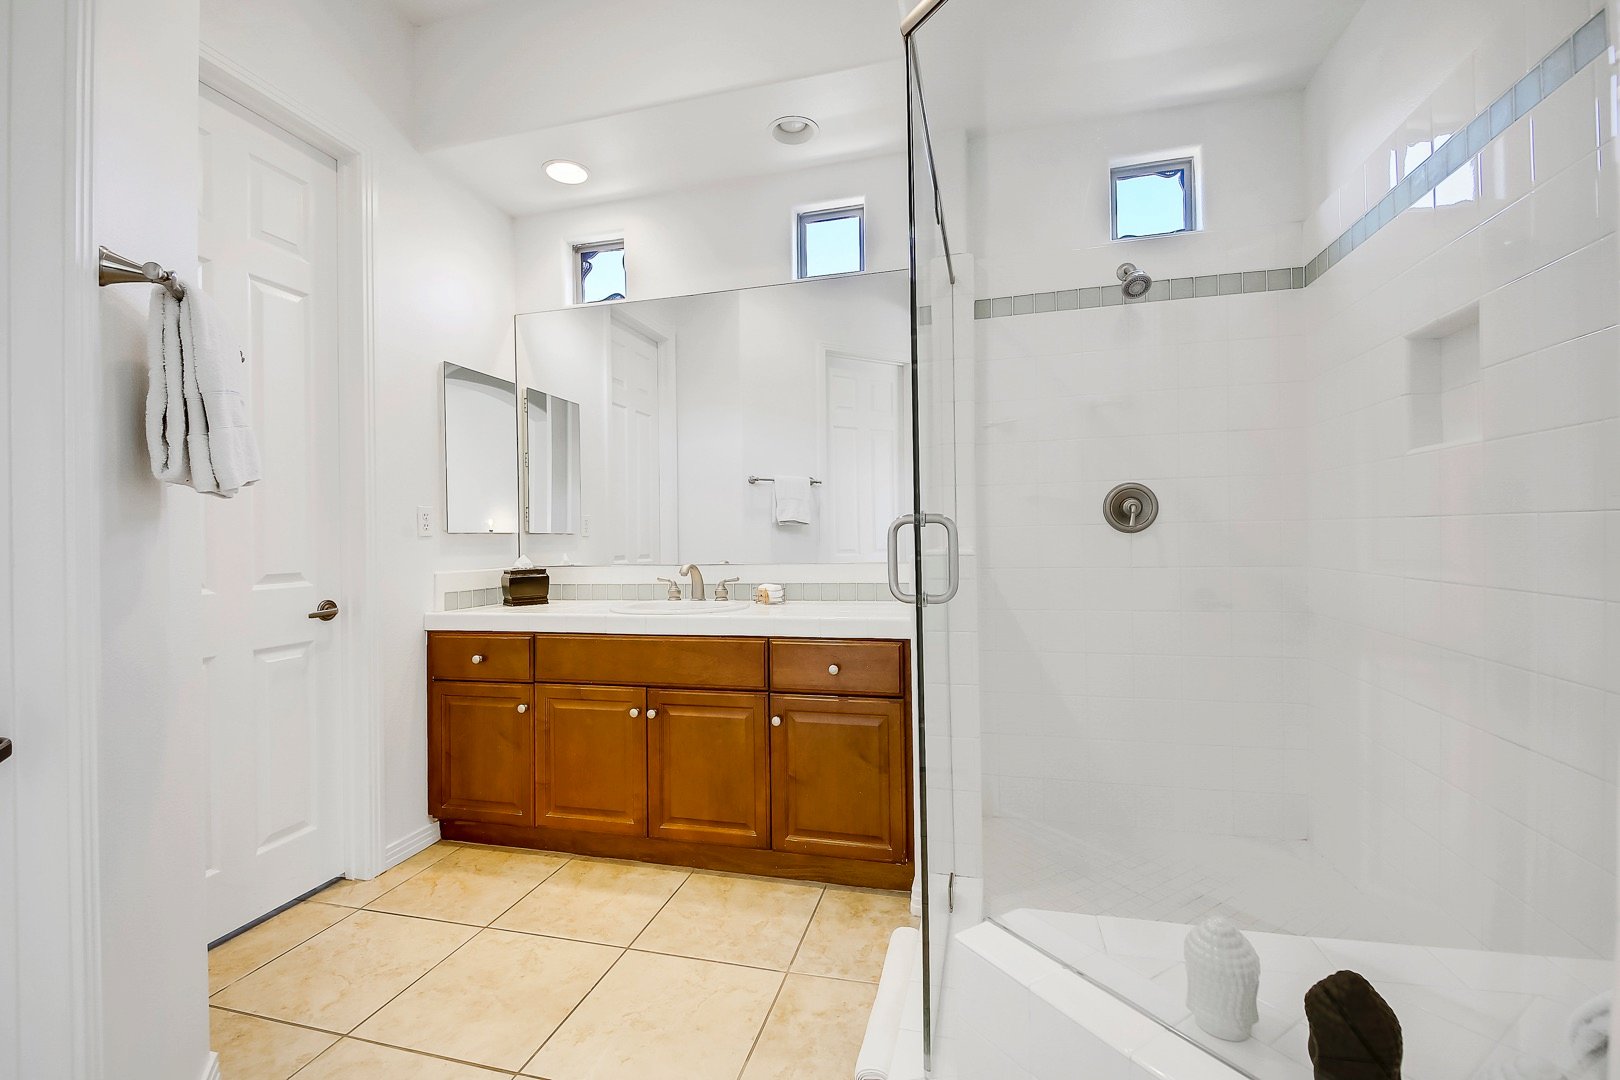 The private, en suite bathroom features a tile shower and a vanity sink.